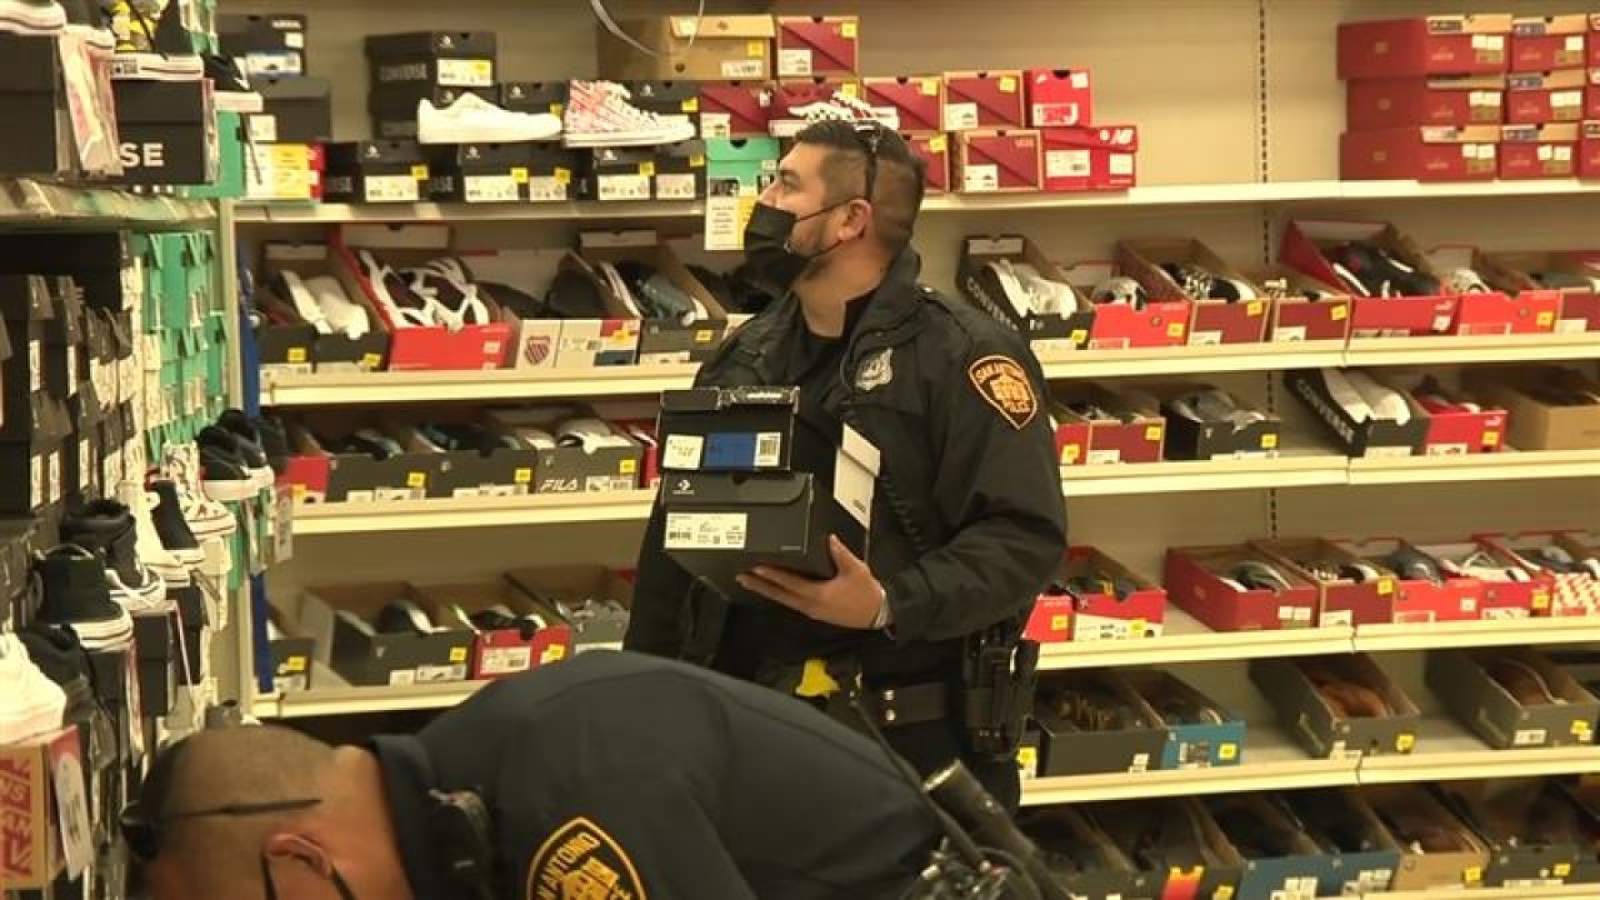 SAPD, KSAT team up for ‘Share the Shoes’ drive